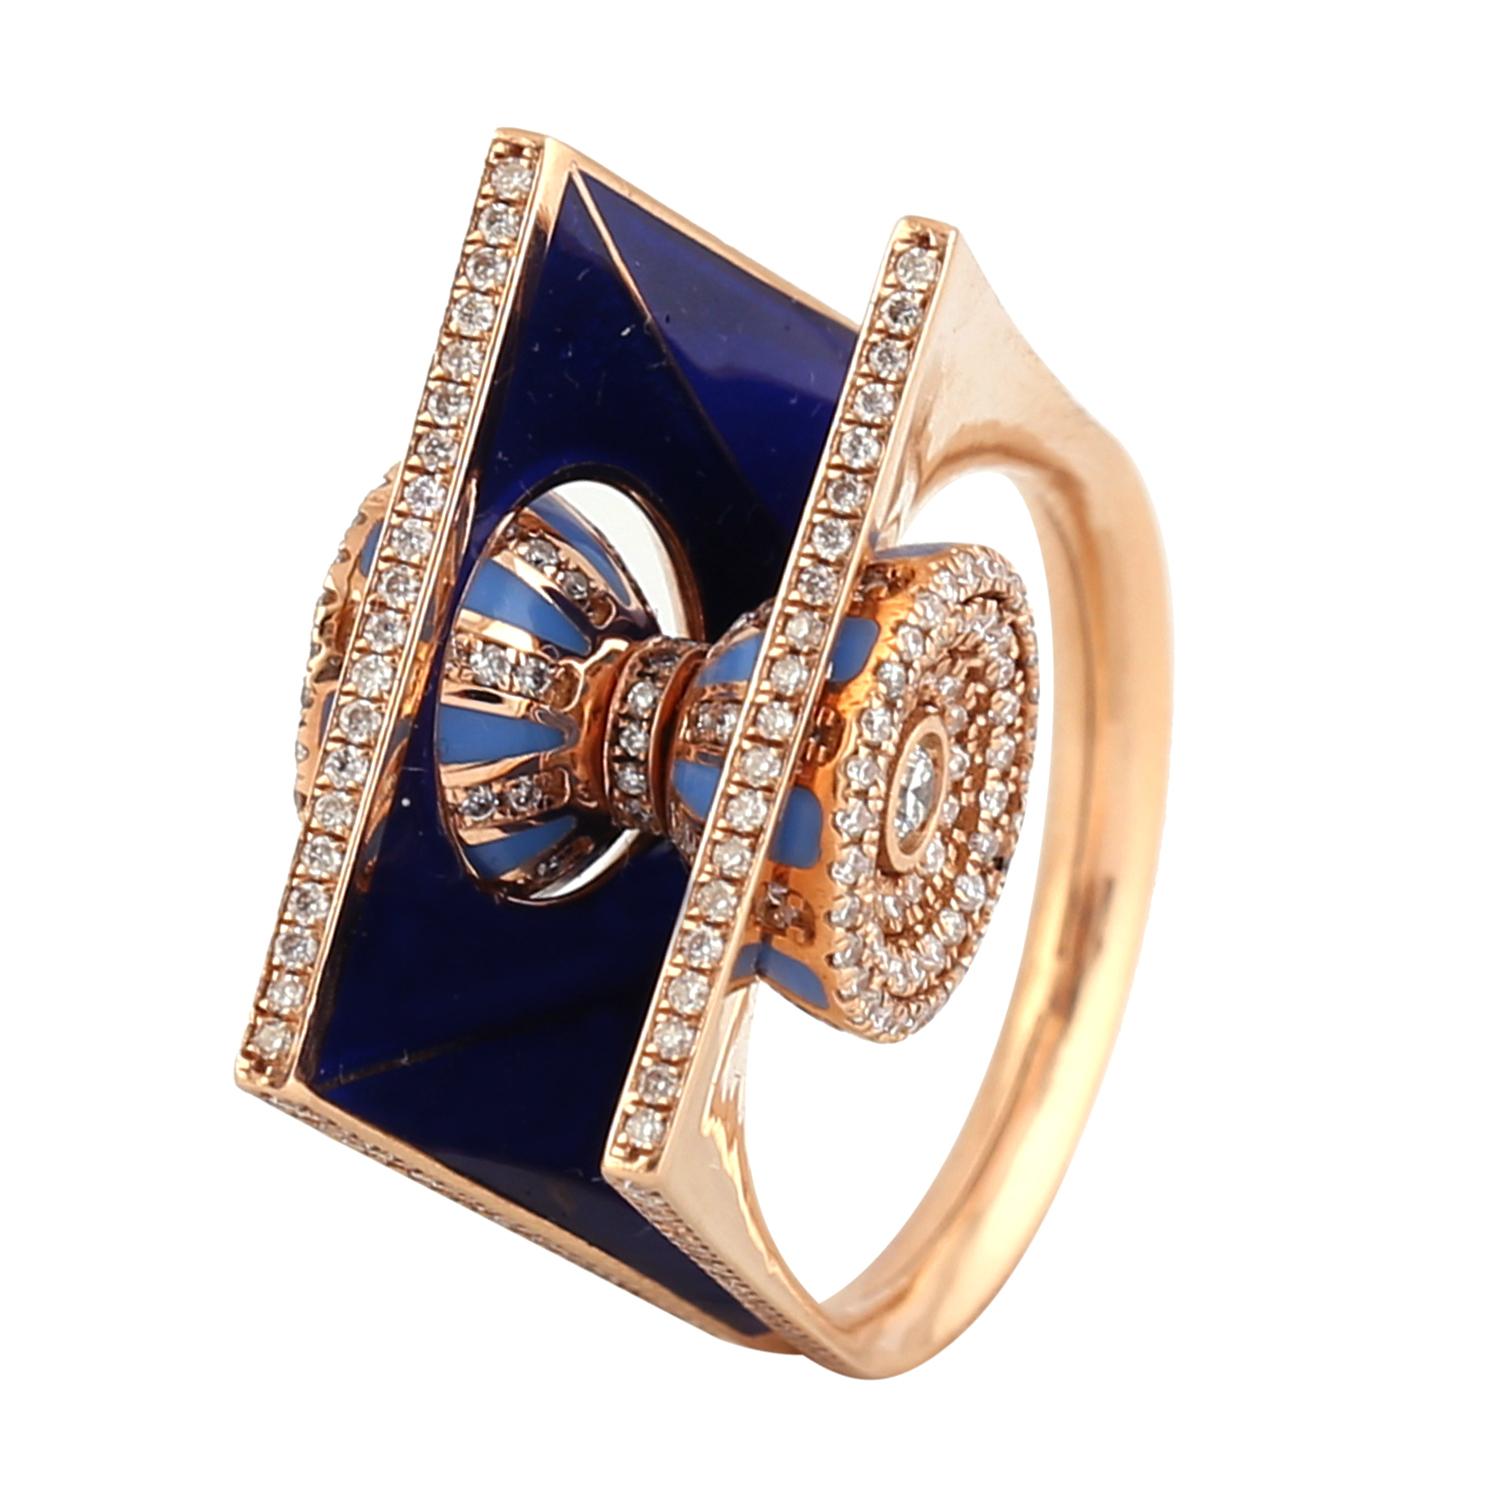 Art Nouveau Power Drum Inside a Open Book Design Ring with Rose Gold, Ceramic and Diamonds For Sale